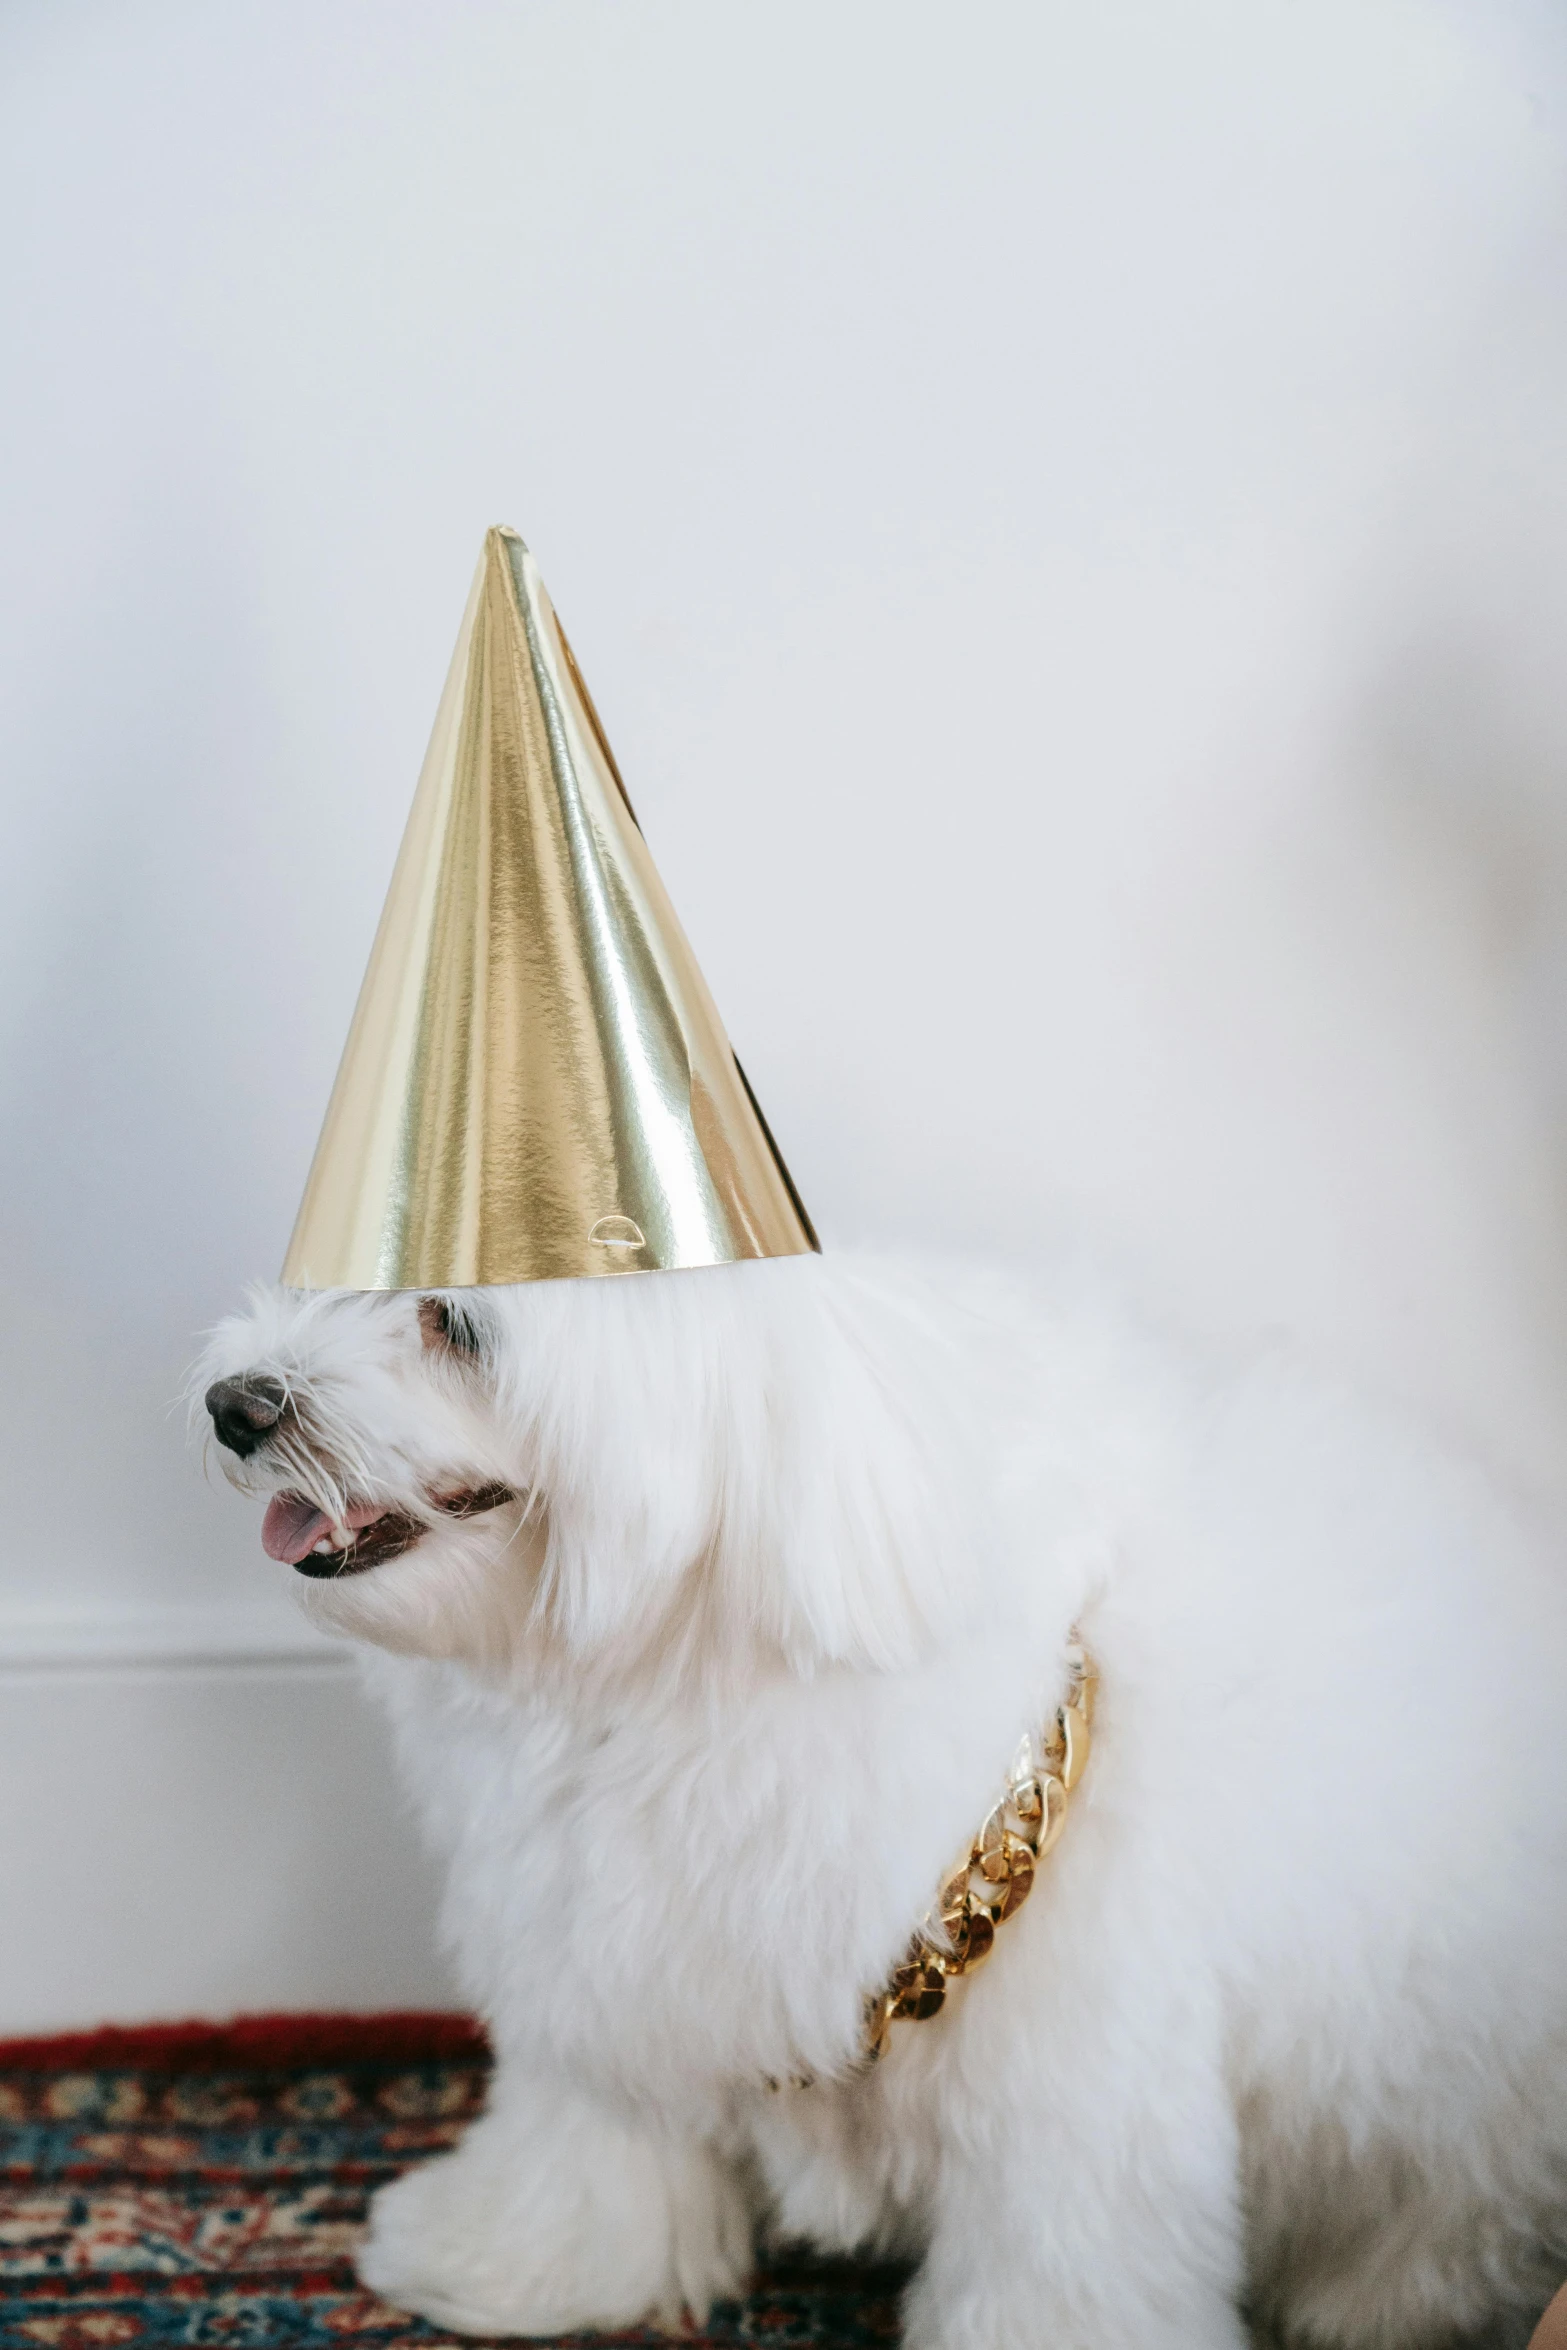 a small white dog wearing a party hat, an album cover, trending on unsplash, gilded with gold, celebration, white hat, blond